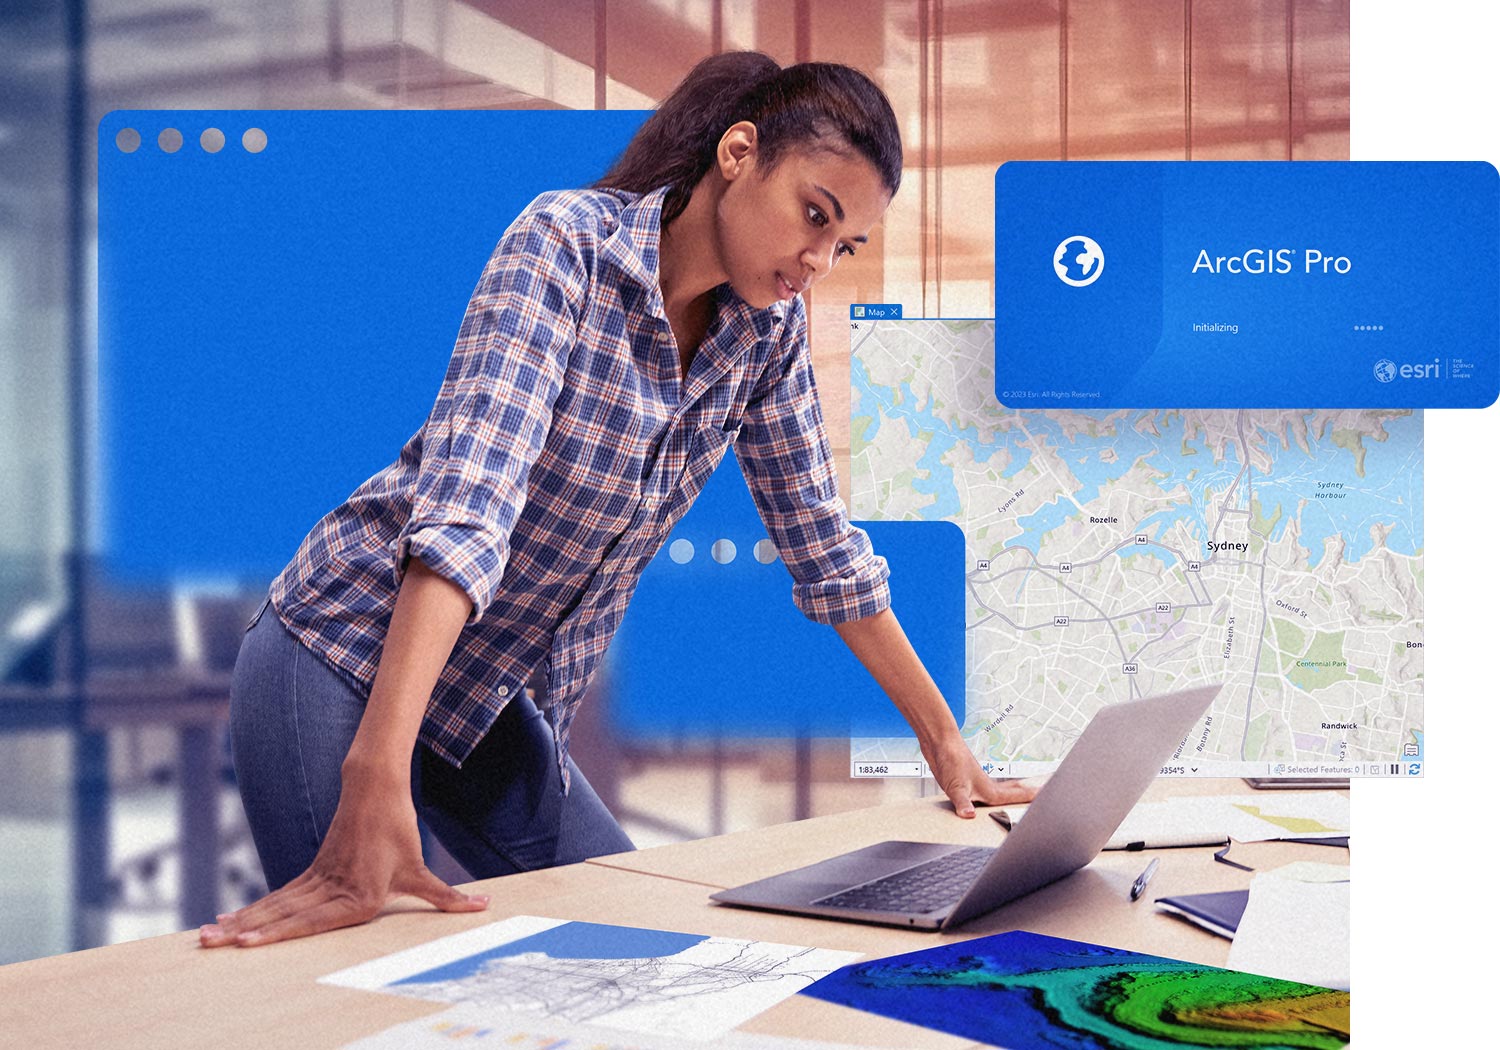 Run ArcGIS on Mac with Parallels Desktop